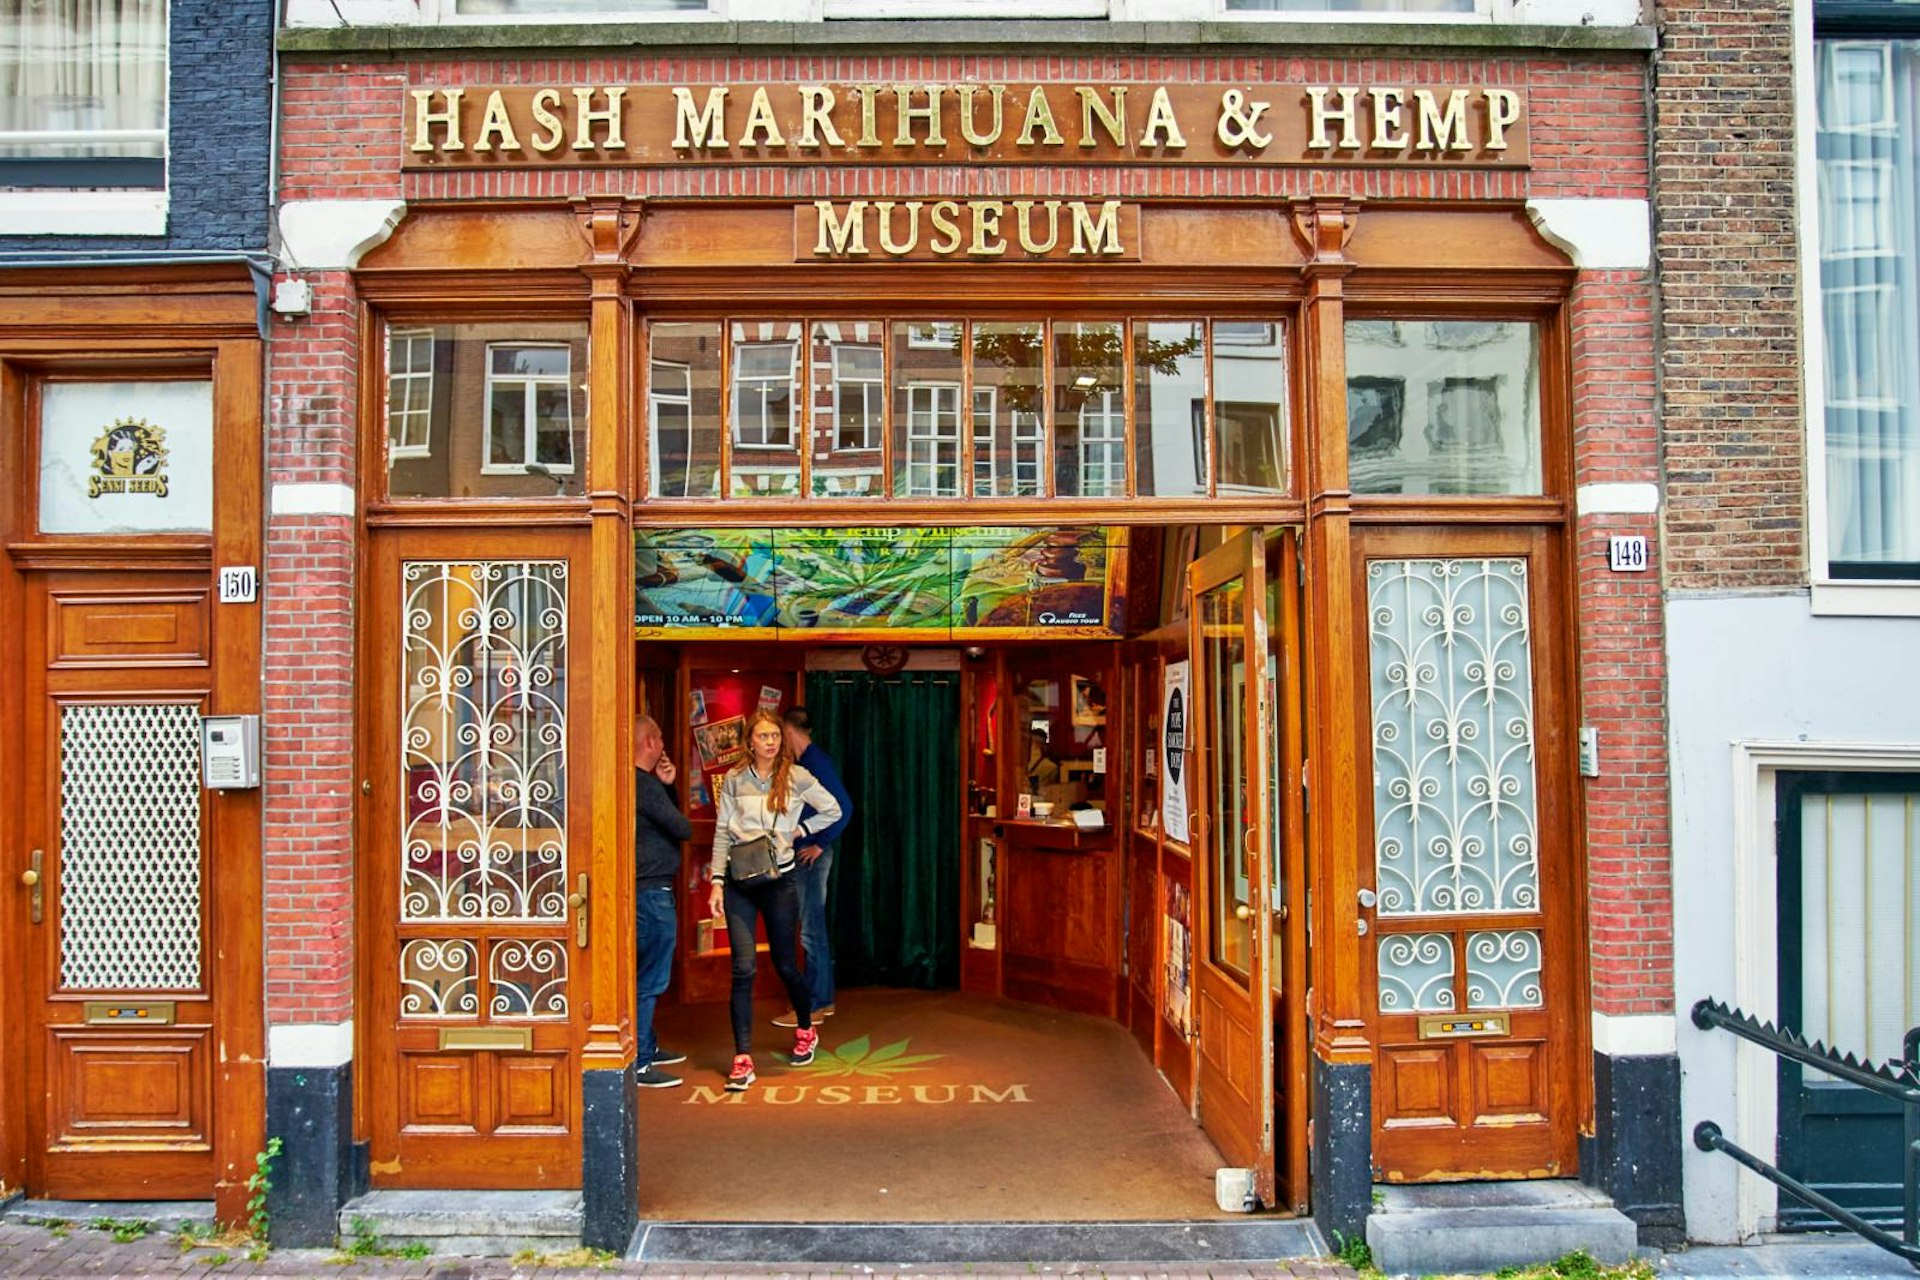 The exterior of the Hash Marijuana & Hemp Museum in the Red Light District in Amsterdam, The Netherlands